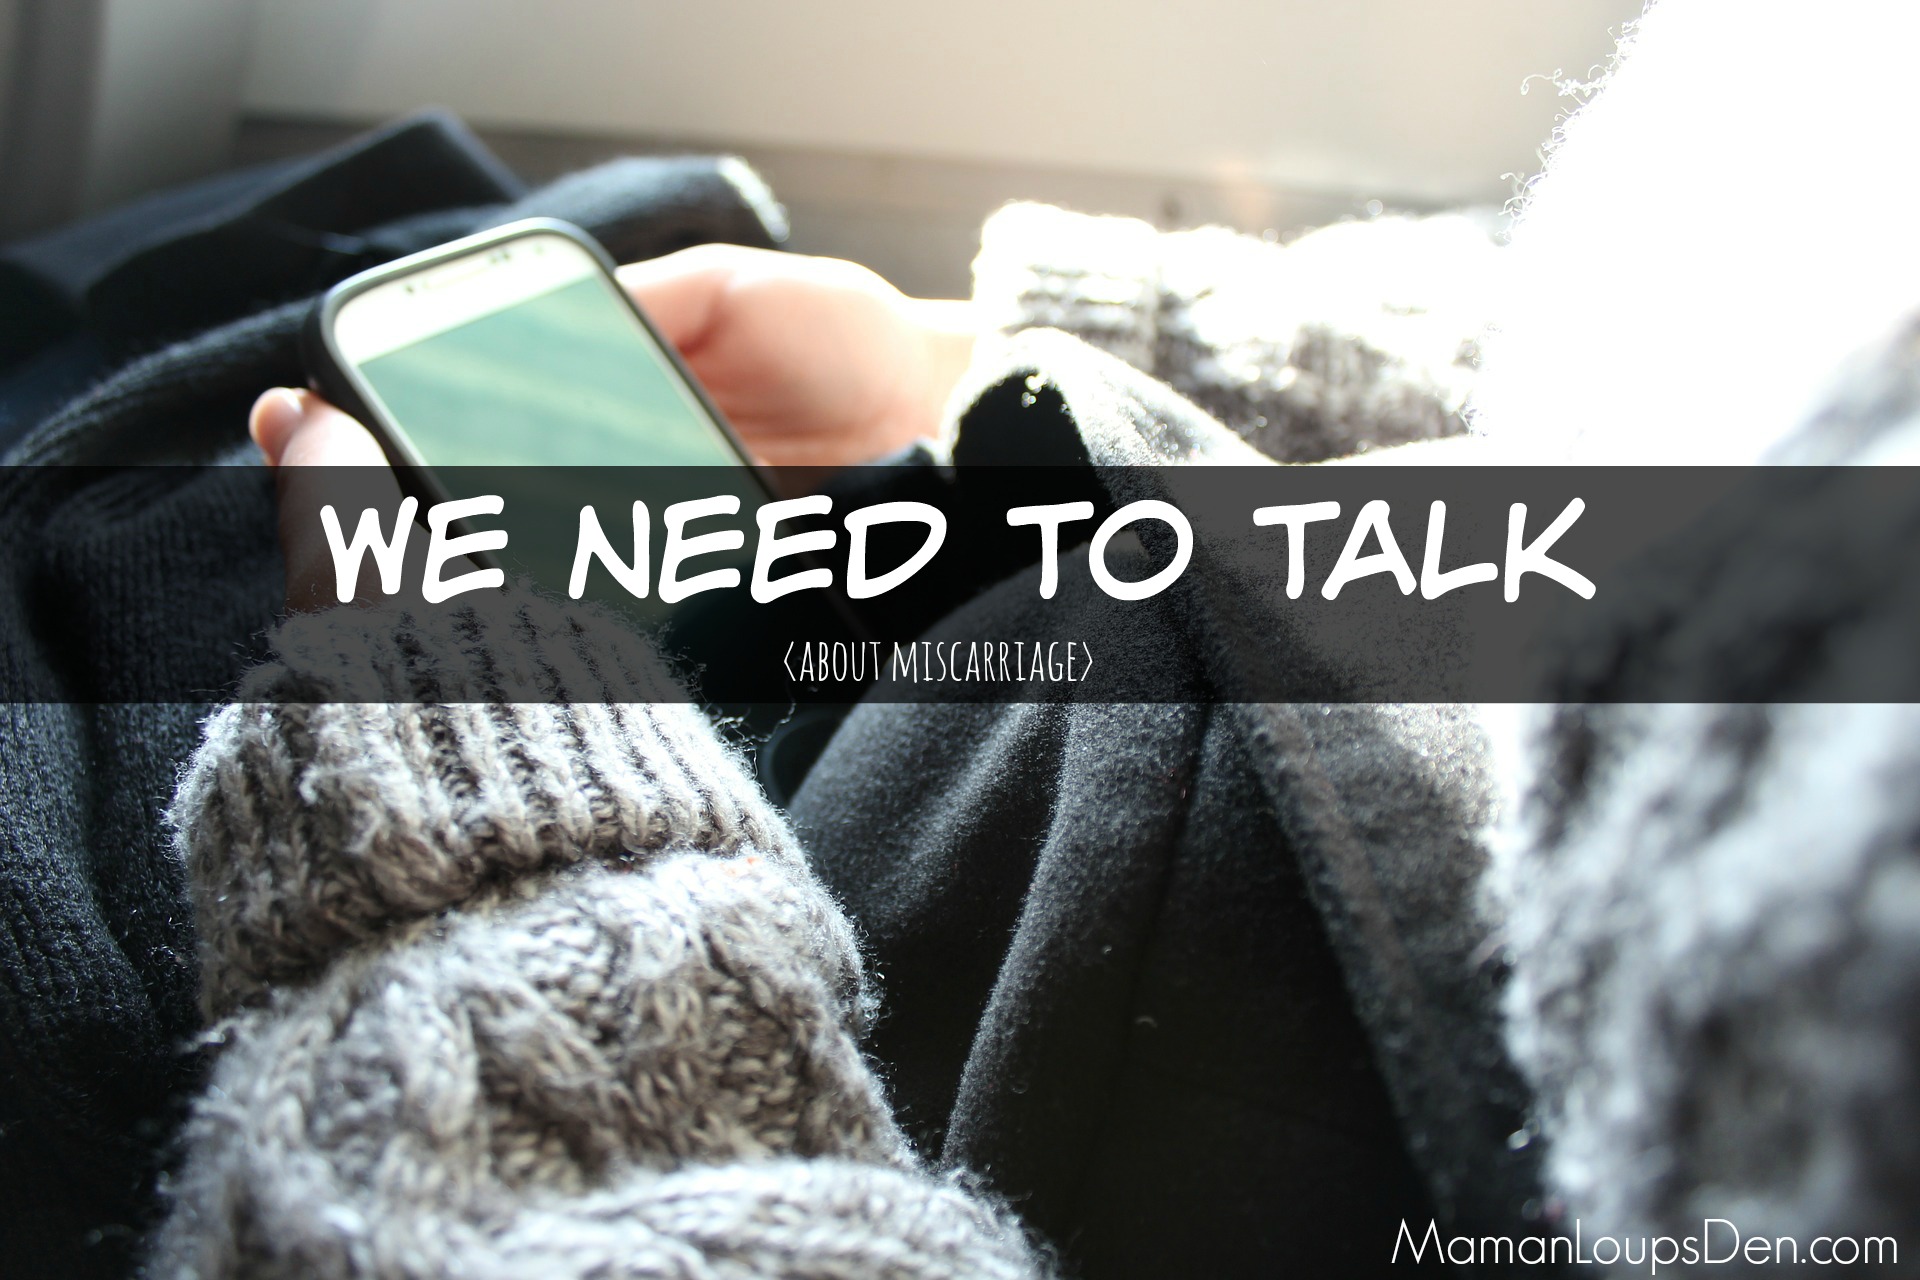 We Need to Talk (about miscarriage)